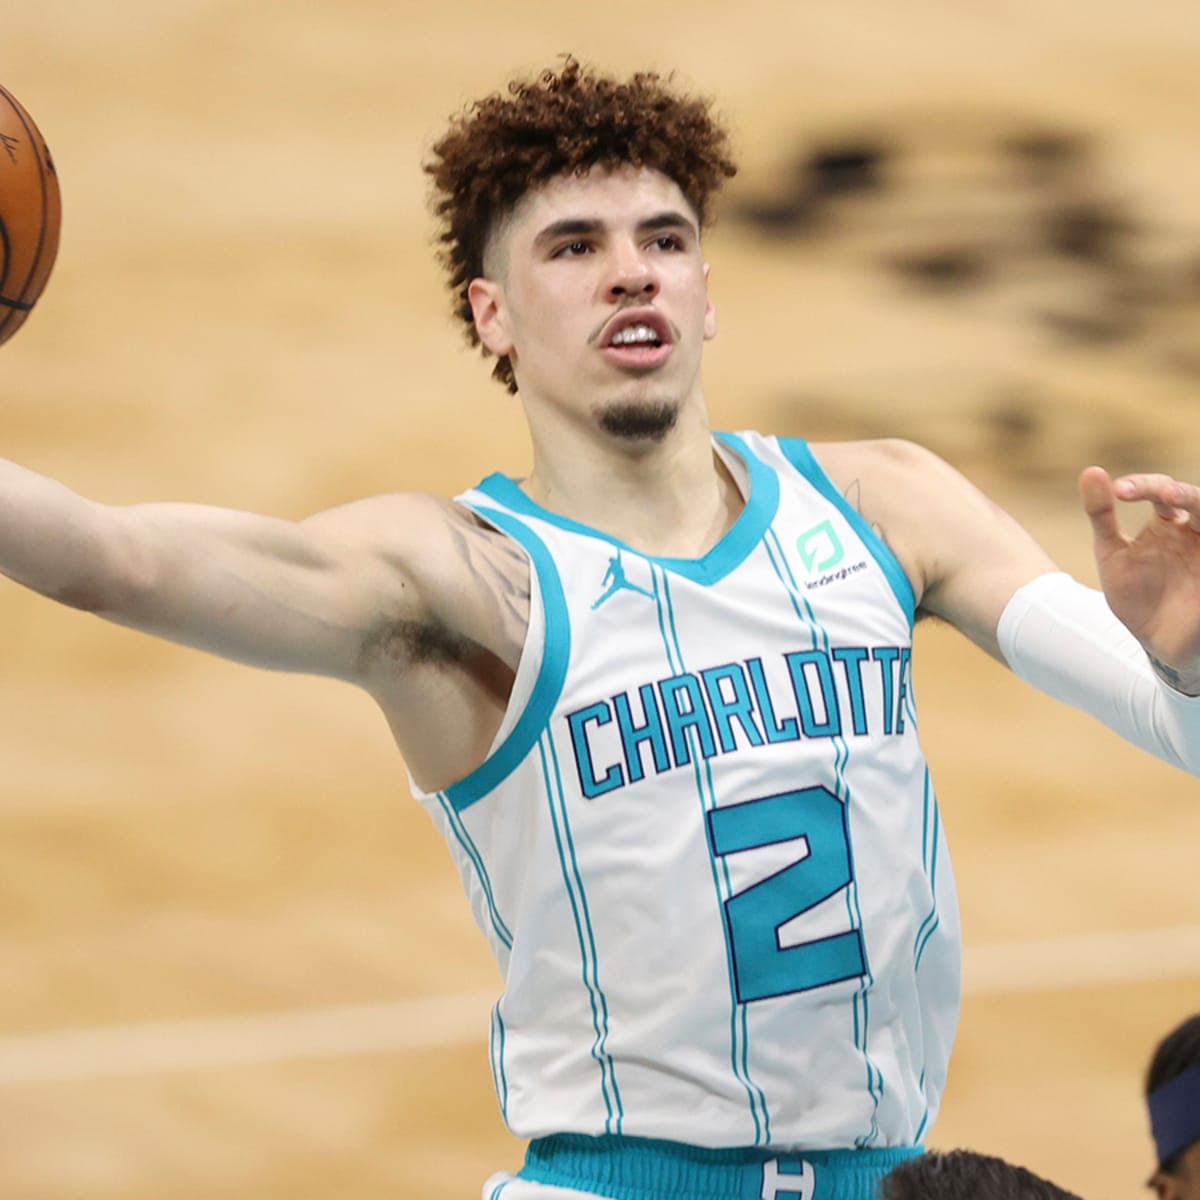 LaMelo Ball says he isn't spending the money from his $35.1